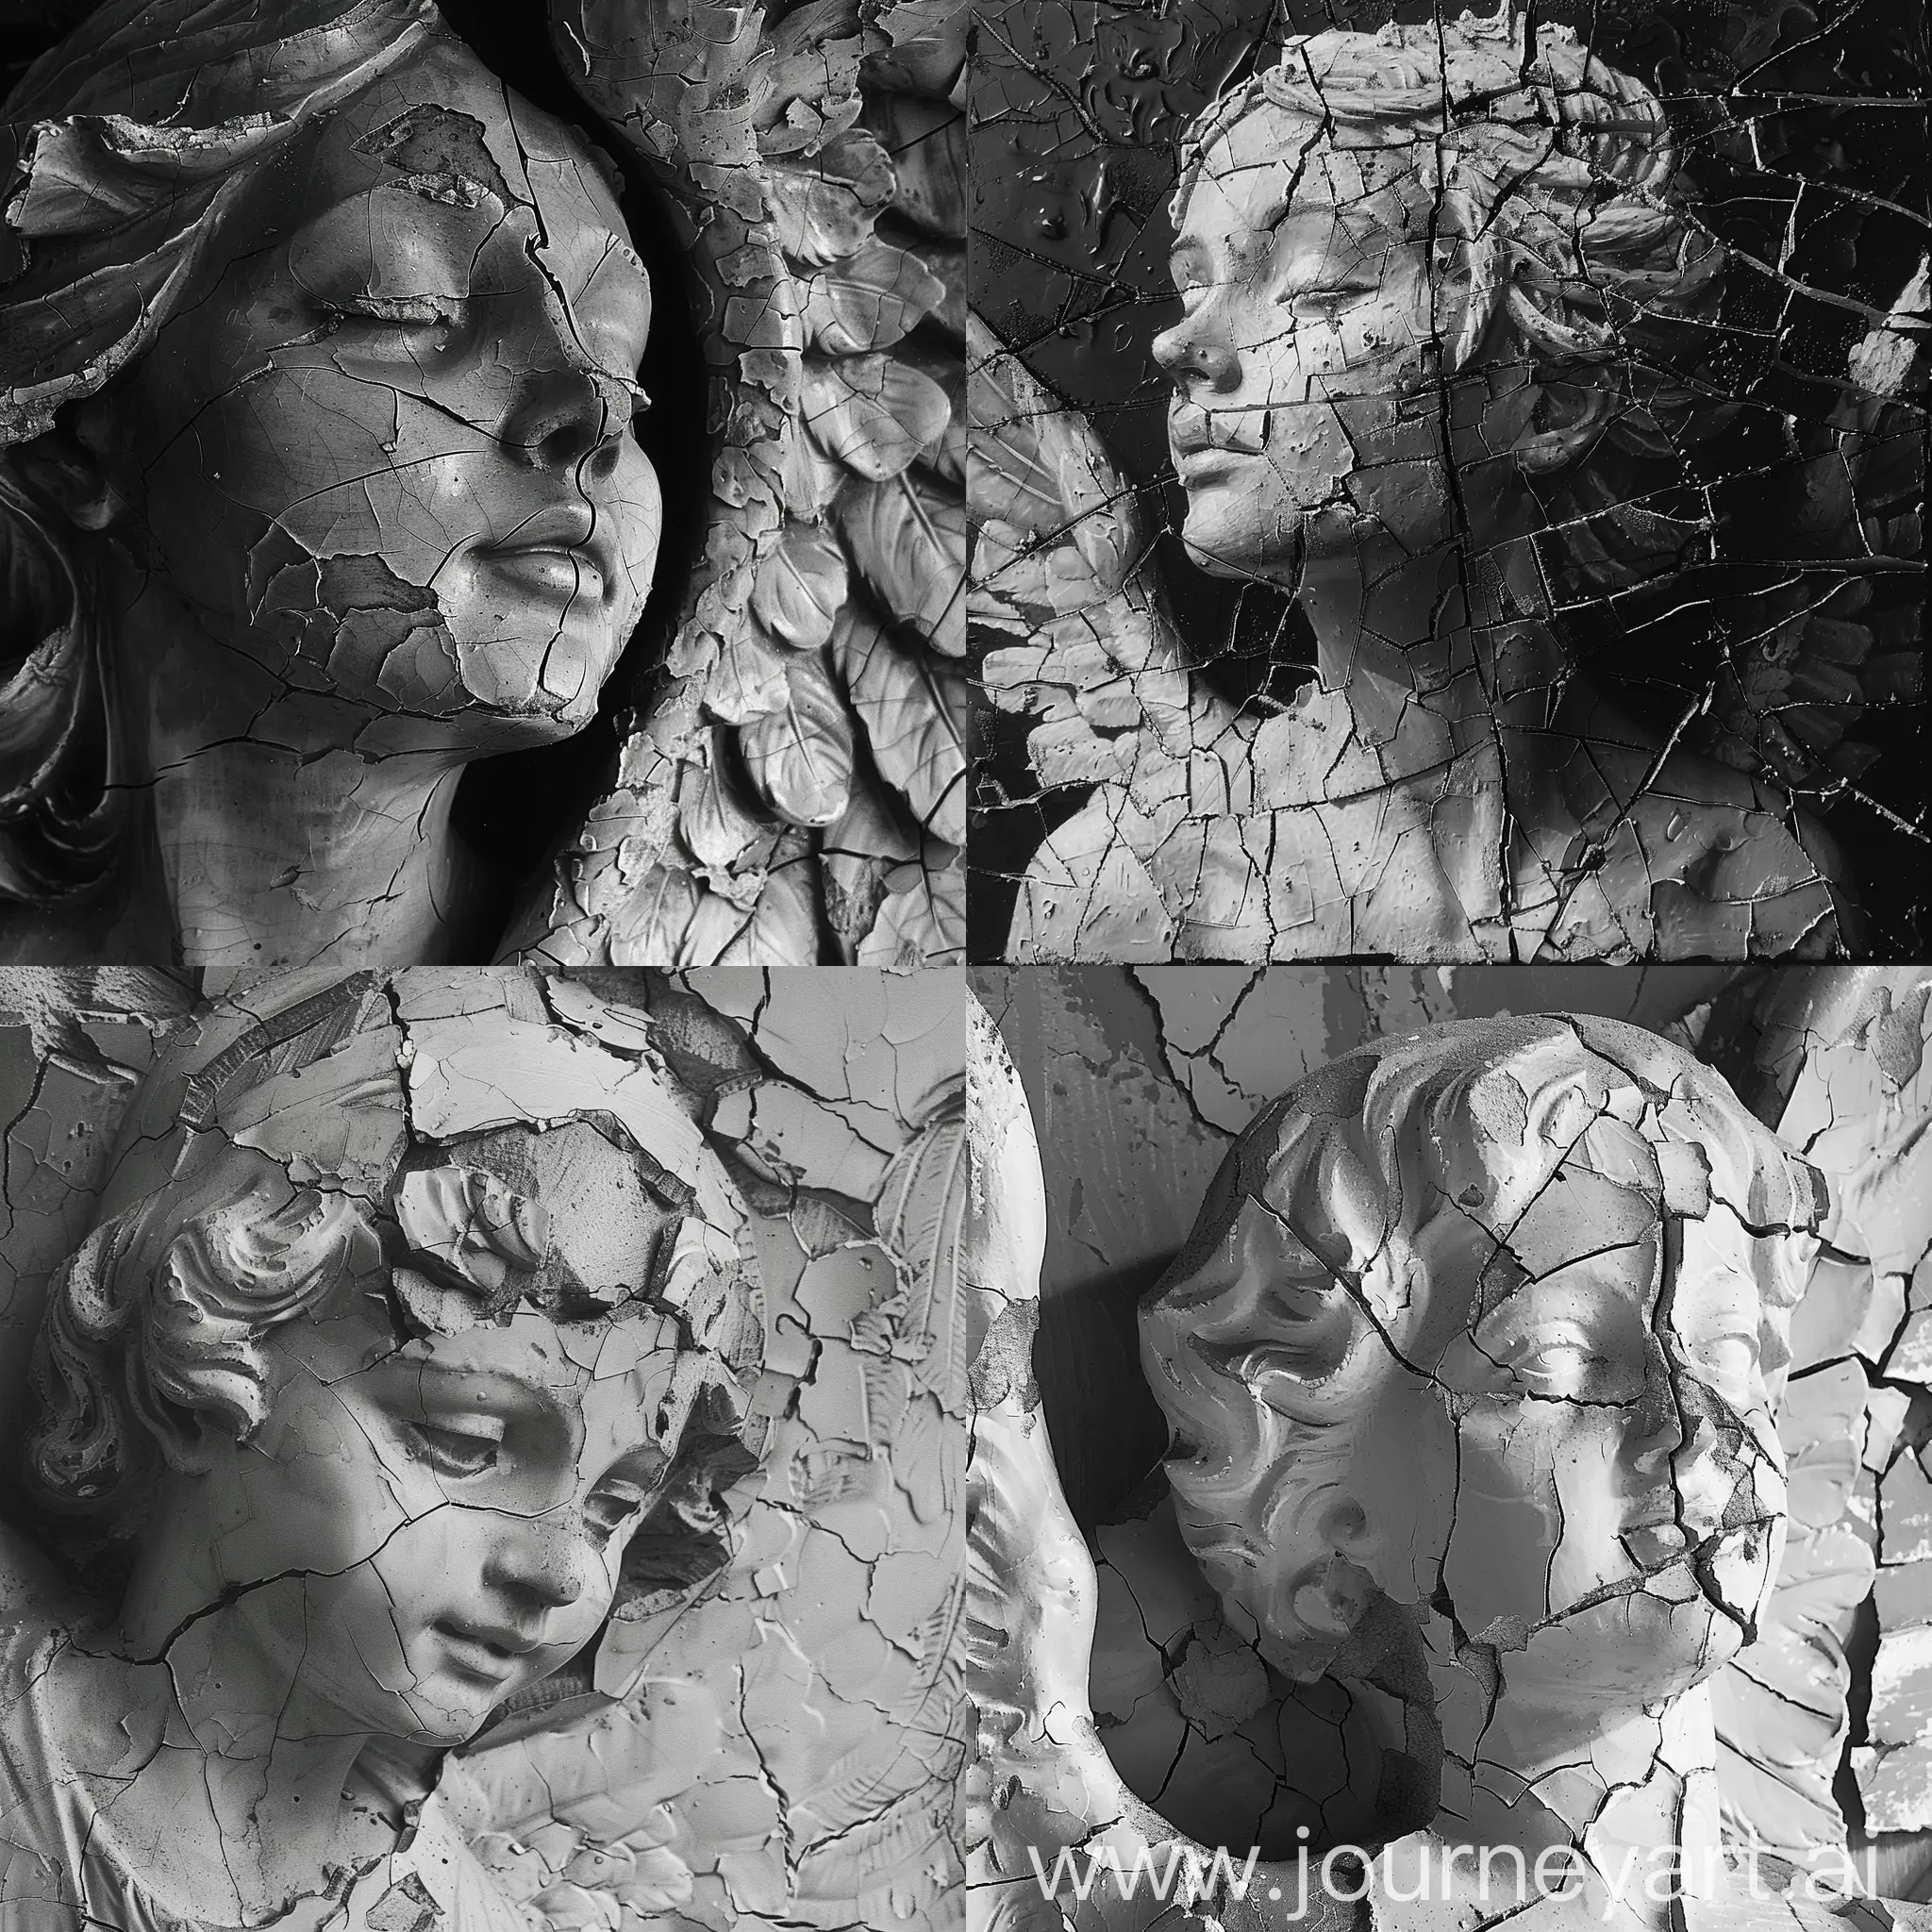 Aged-Stone-Angel-Sculpture-Vintage-Tempera-Artwork-in-Black-and-White